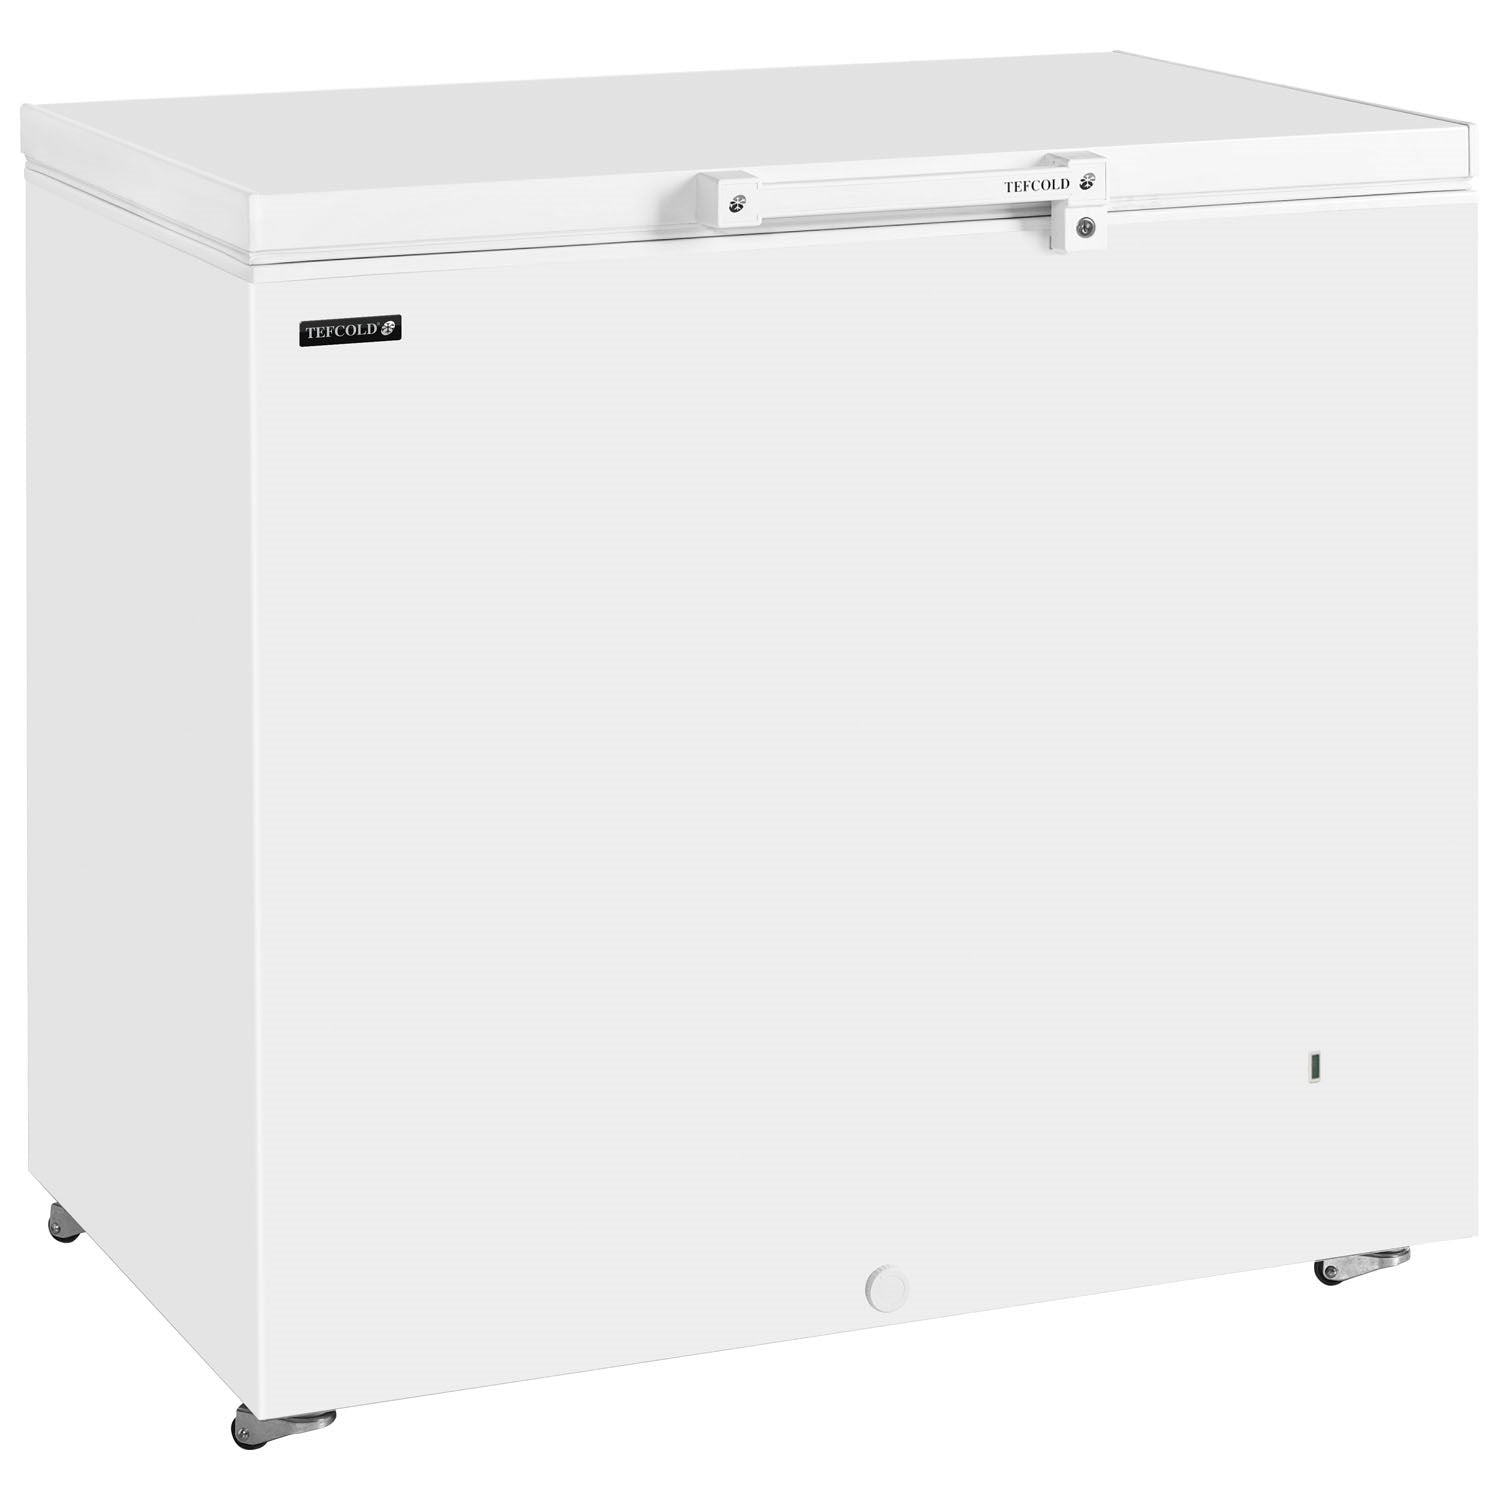 Tefcold GM Range Solid Lid Chest Freezer.Product Ref:00480.MODEL:GM200.🚚 4-6 Days Delivery